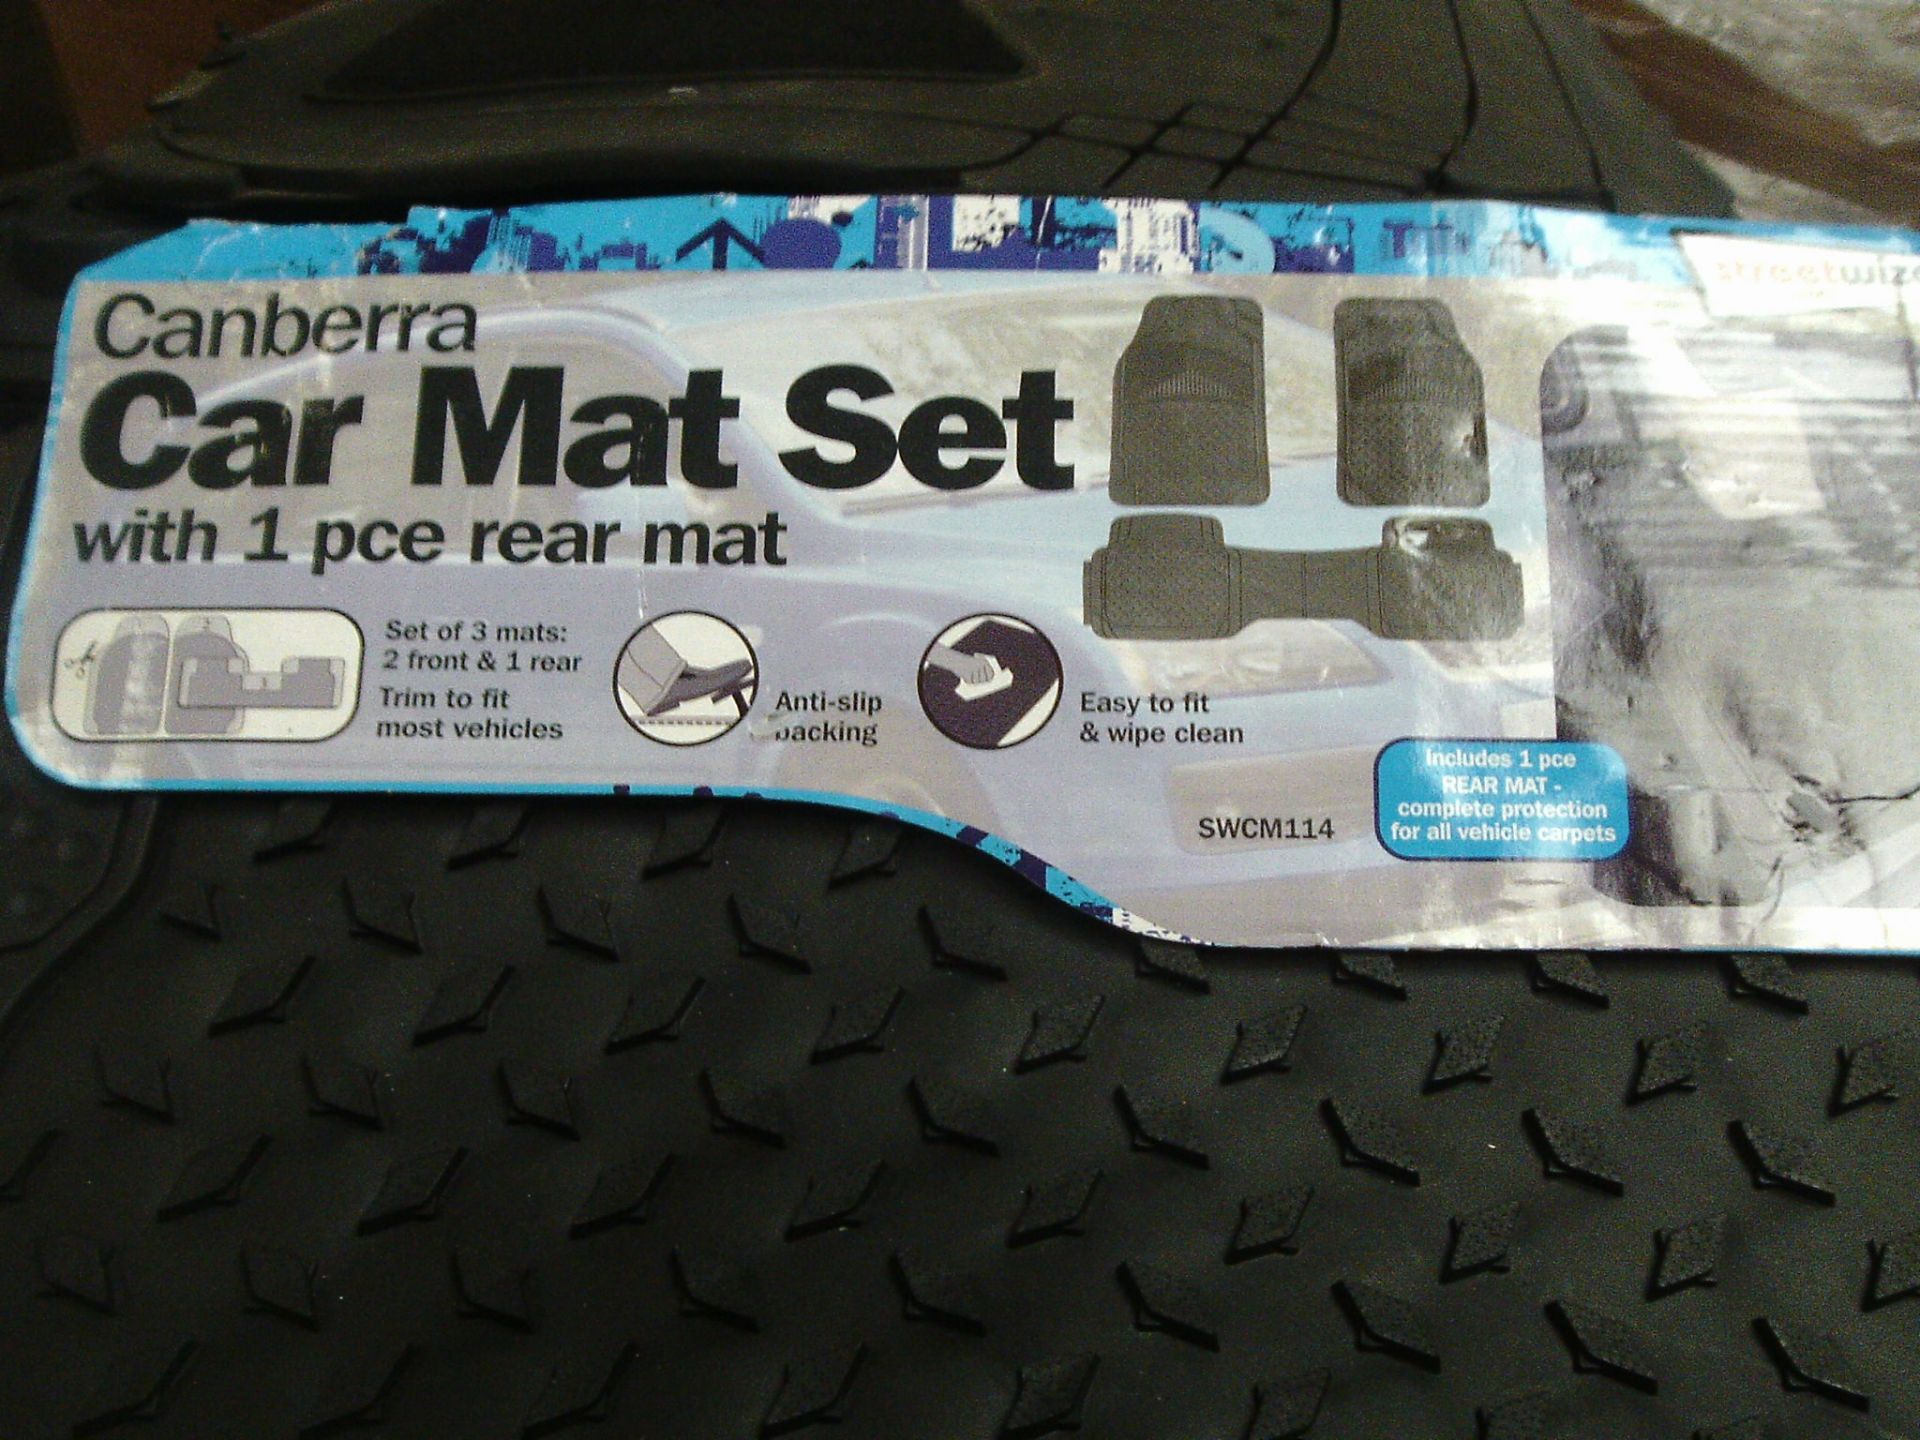 10 x sets of rubber mostly Heavy Duty car mat sets - all new - all complete ranging from £10 - £19. - Image 3 of 5